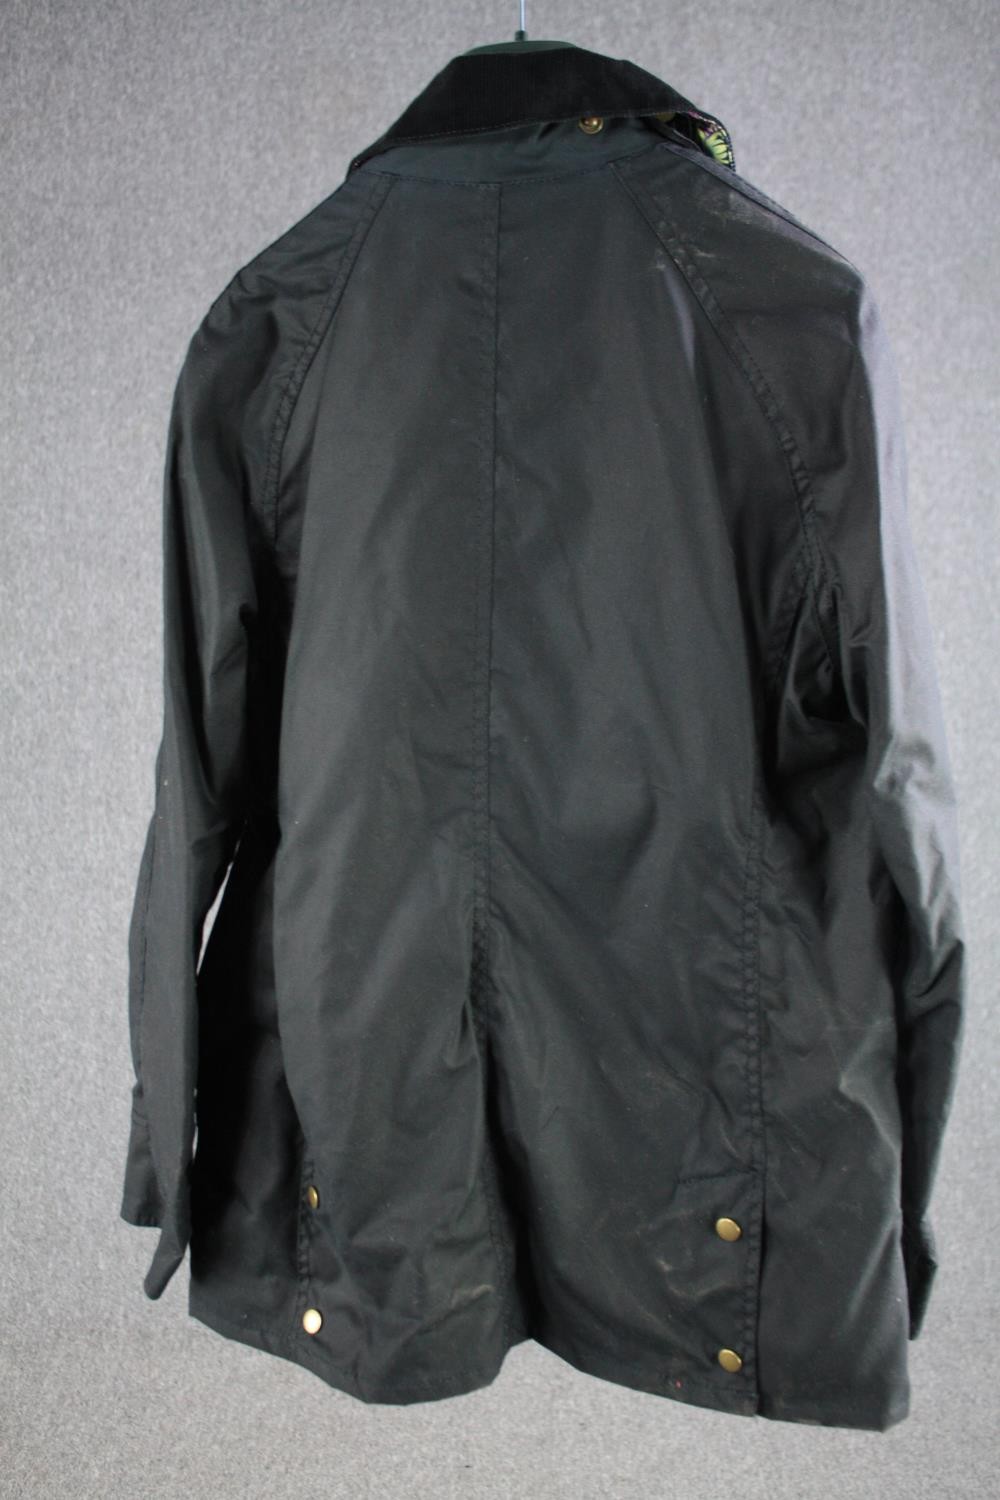 Women's Barbour jacket. UK size 10 with a paisley lining. - Image 6 of 6